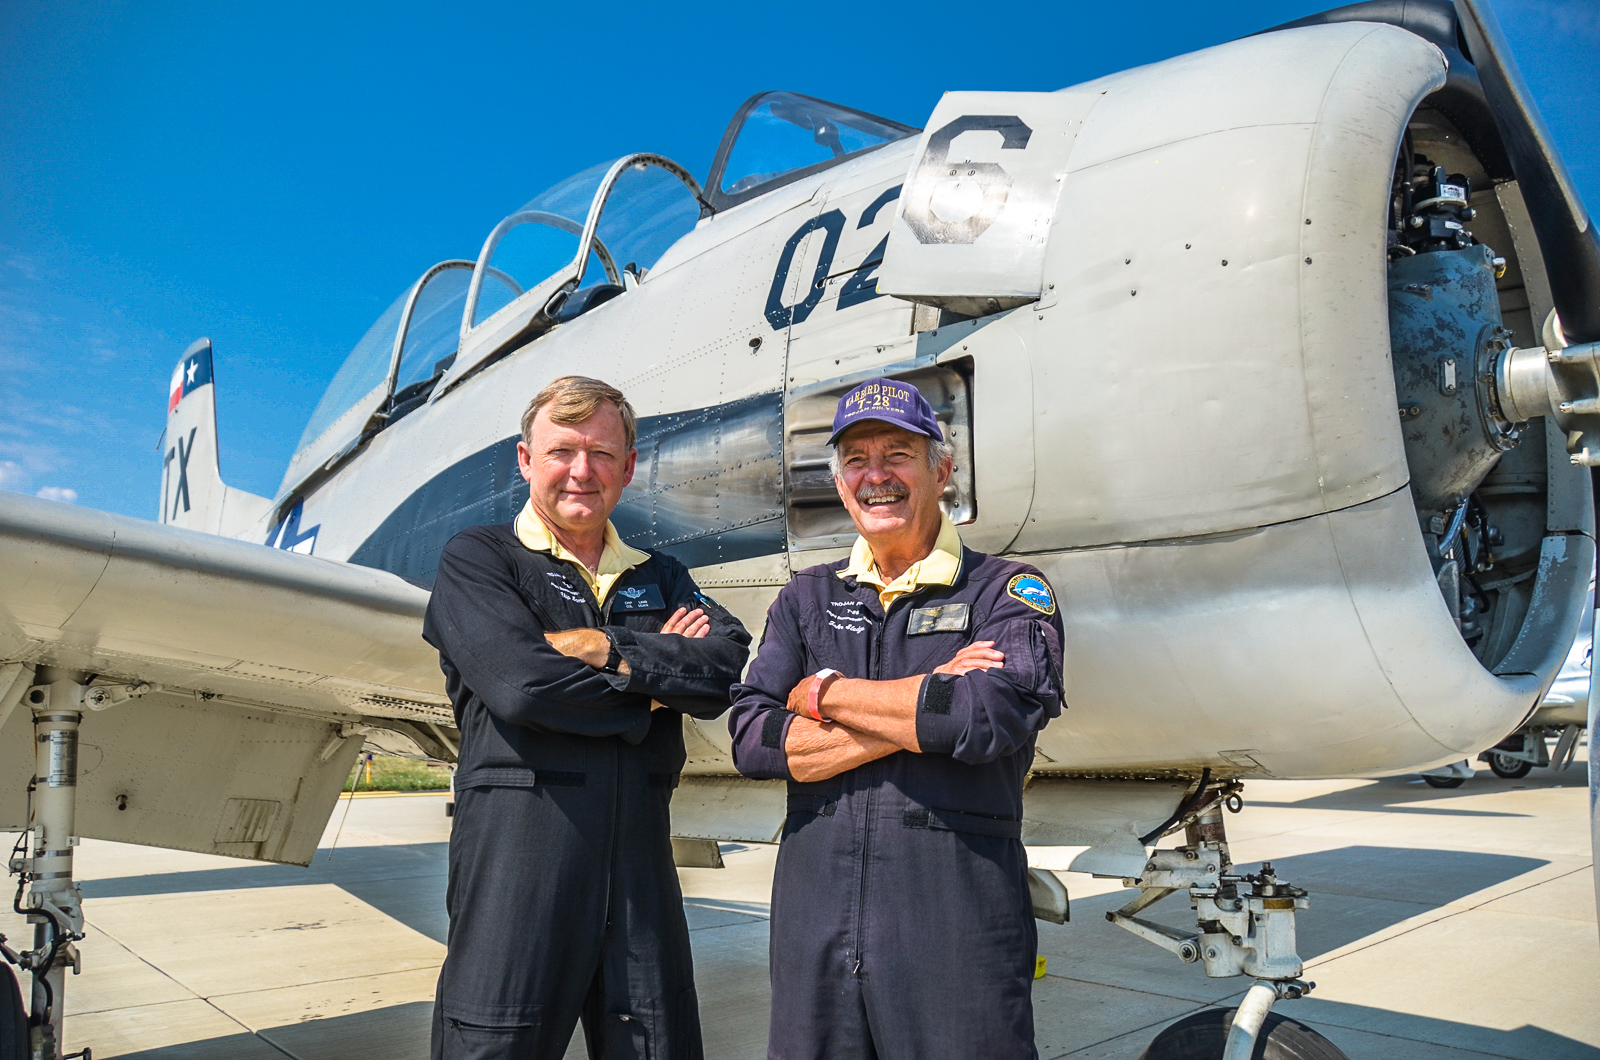 Chip Lamb and  John Sledge, the Trojan Phlyers, stand in front of one of their aircraft. (photo via Trojan Phlyers)